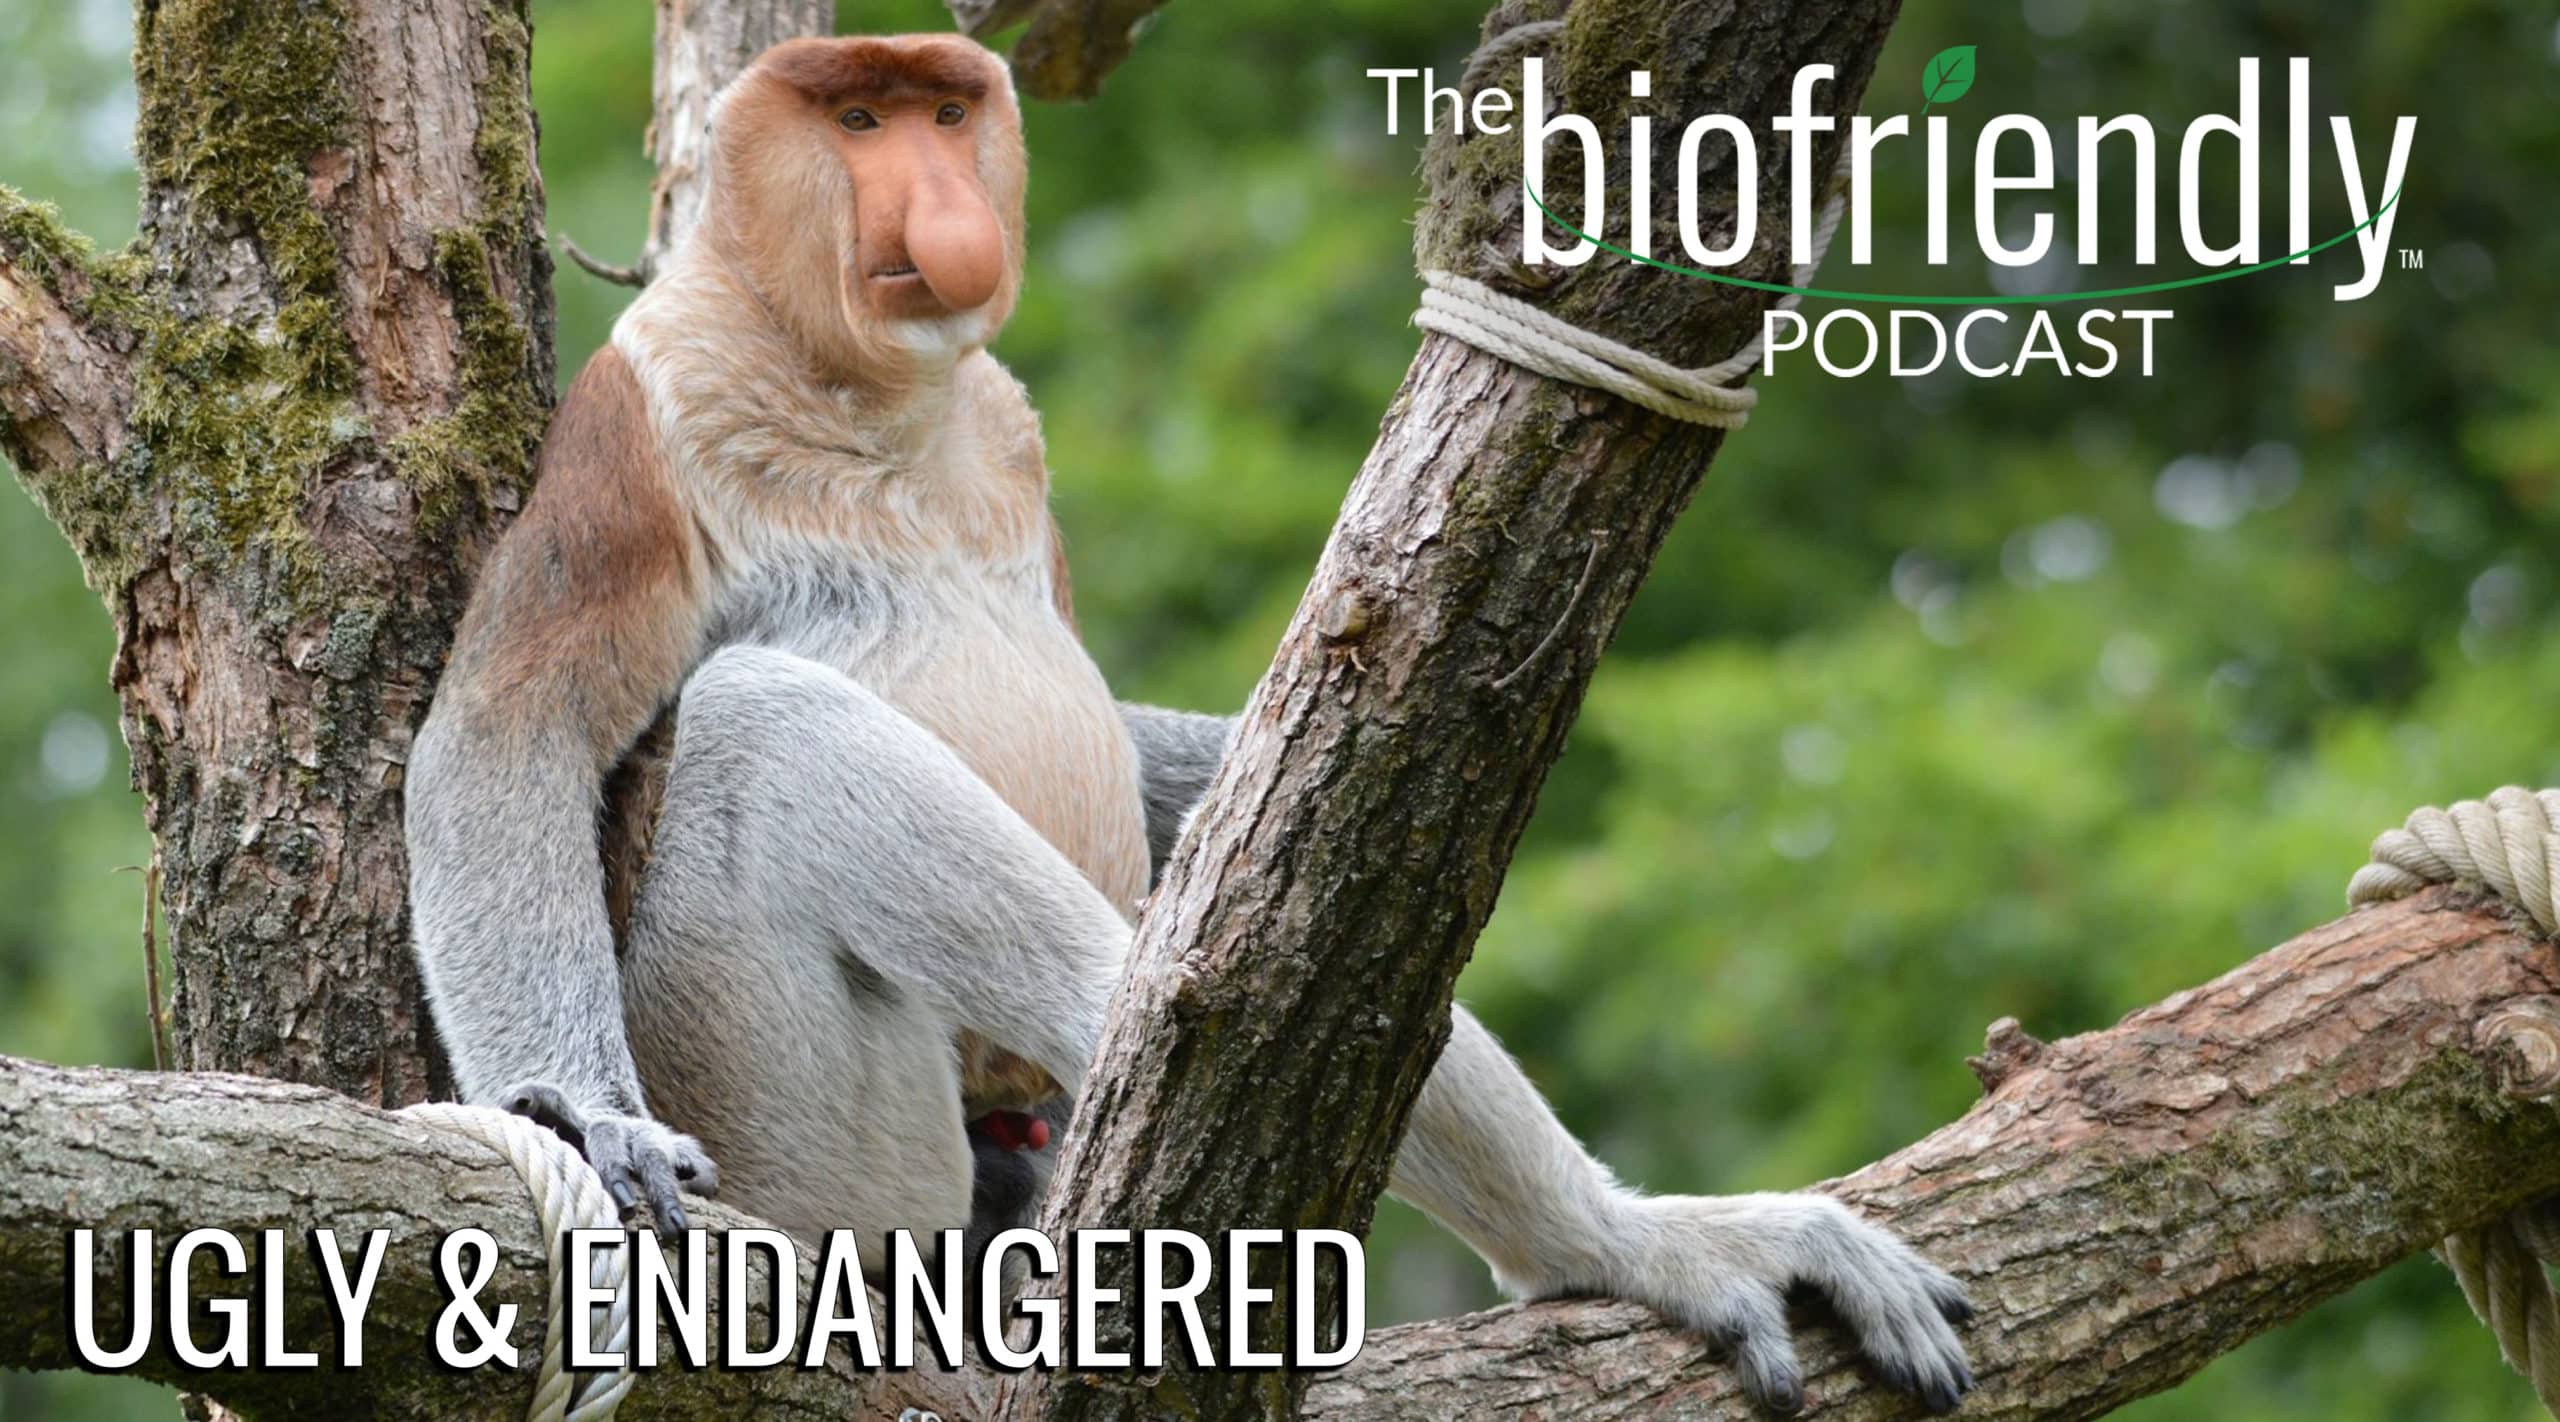 The Biofriendly Podcast - Episode 46 - Ugly and Endangered